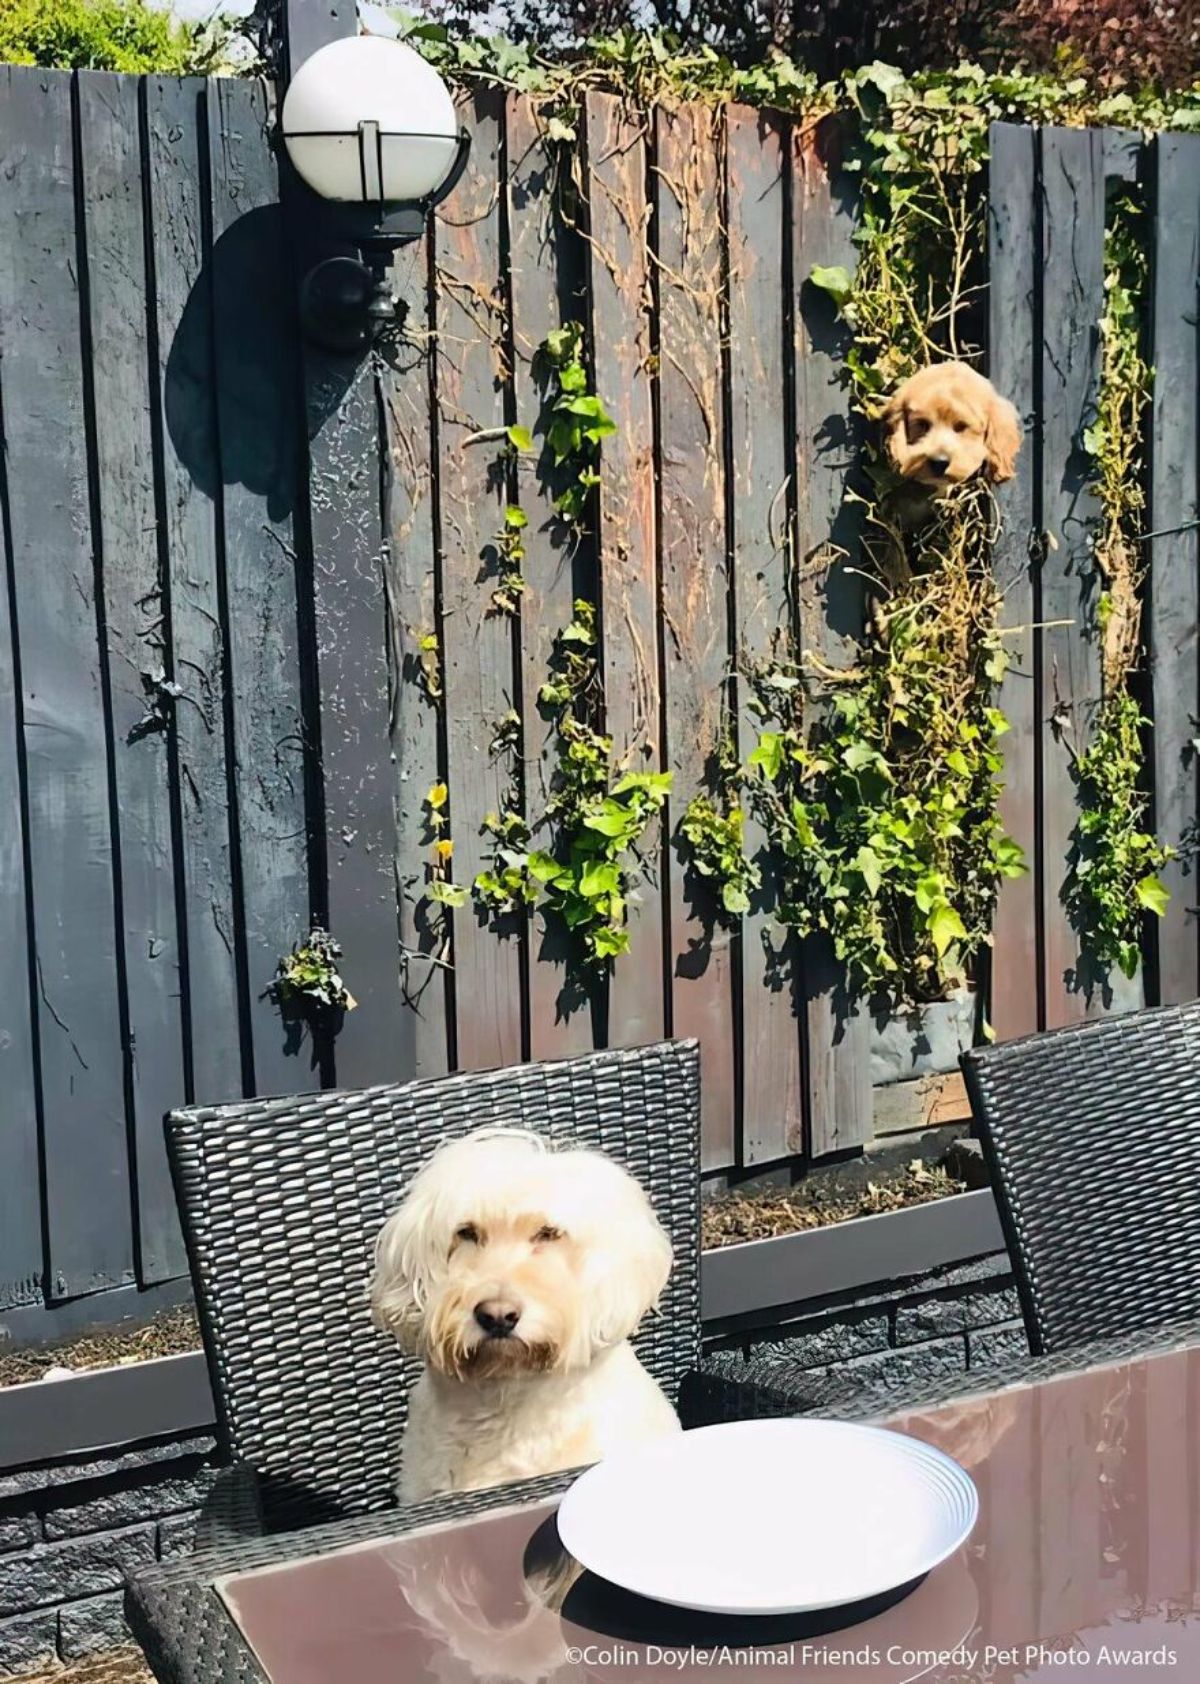 white fluffy dog sitting on a black chair at a table with a small fluffy brown dog sticking its head through a fence by some vines